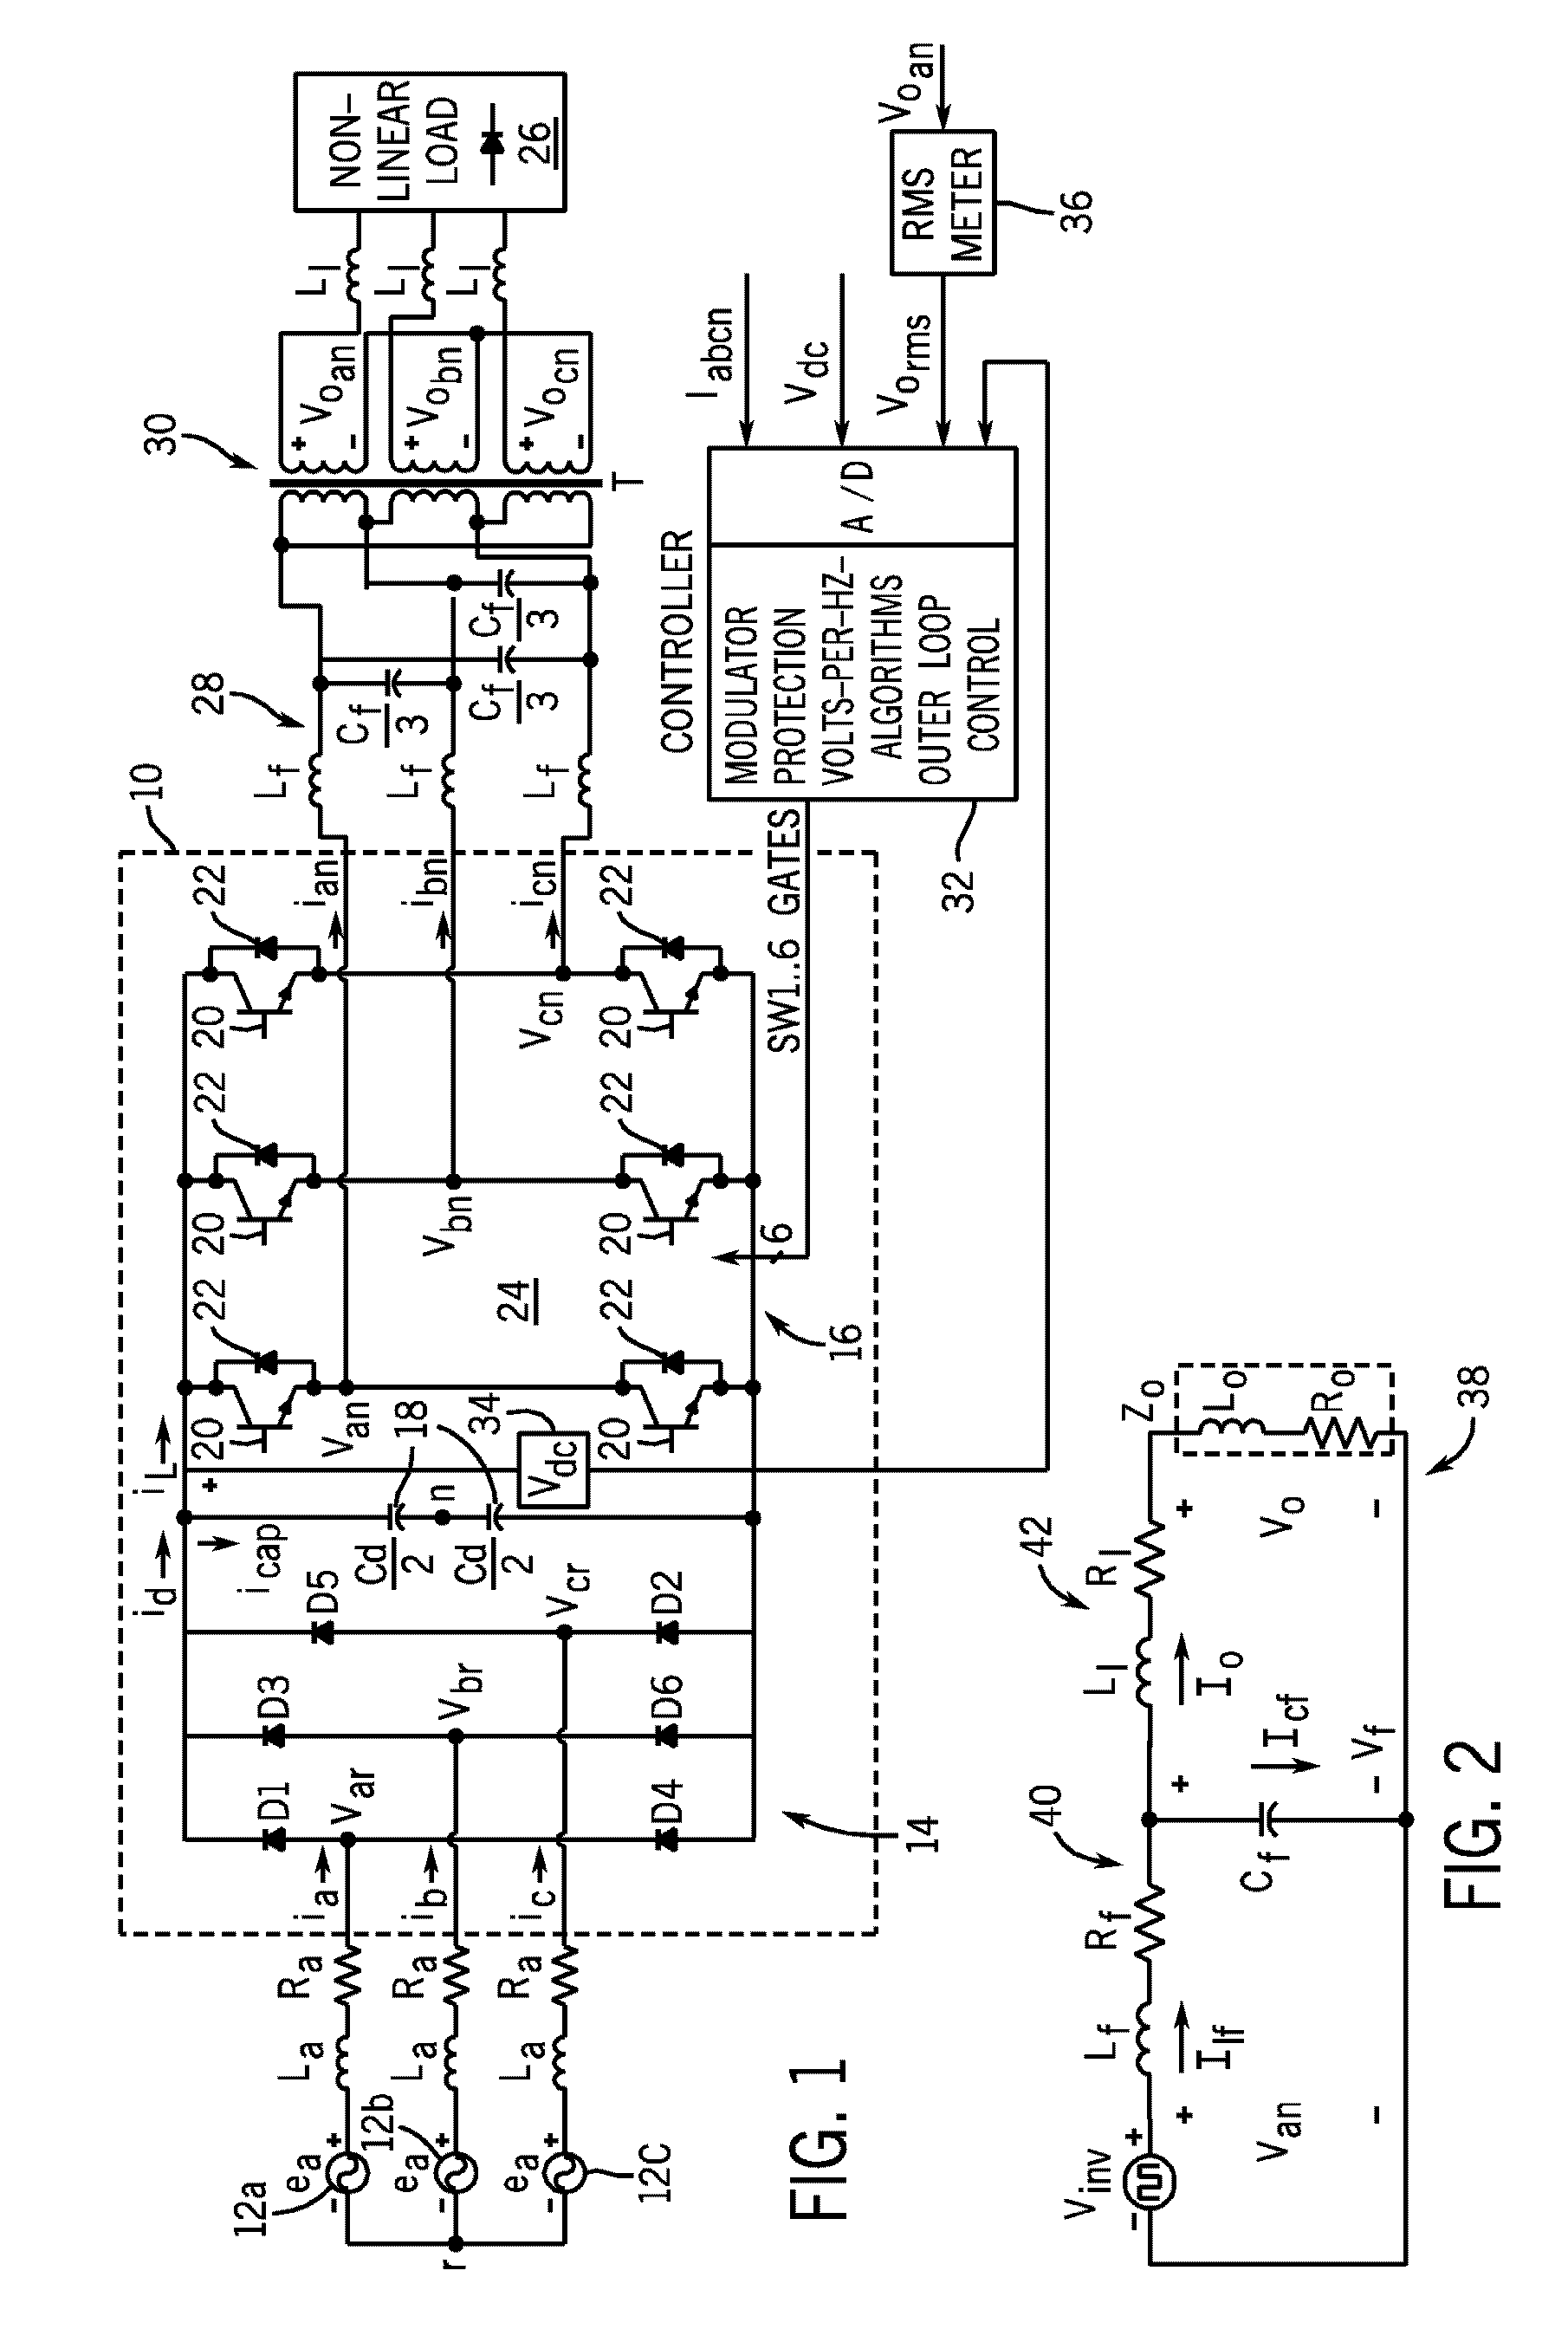 System and method of controlling power to a non-motor load